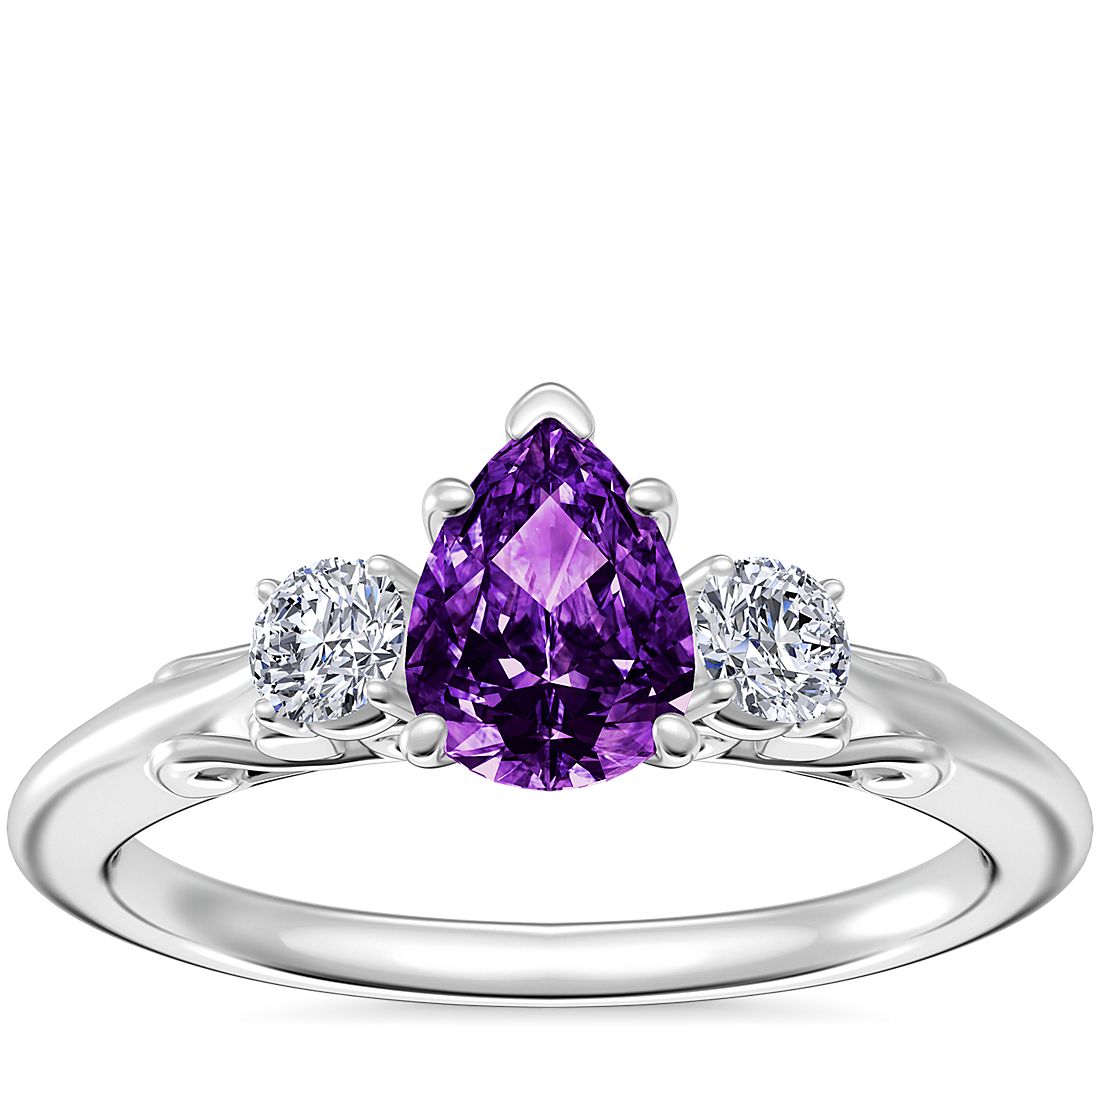 Vintage Three Stone Engagement Ring with Pear-Shaped Amethyst in Platinum (7x5mm)